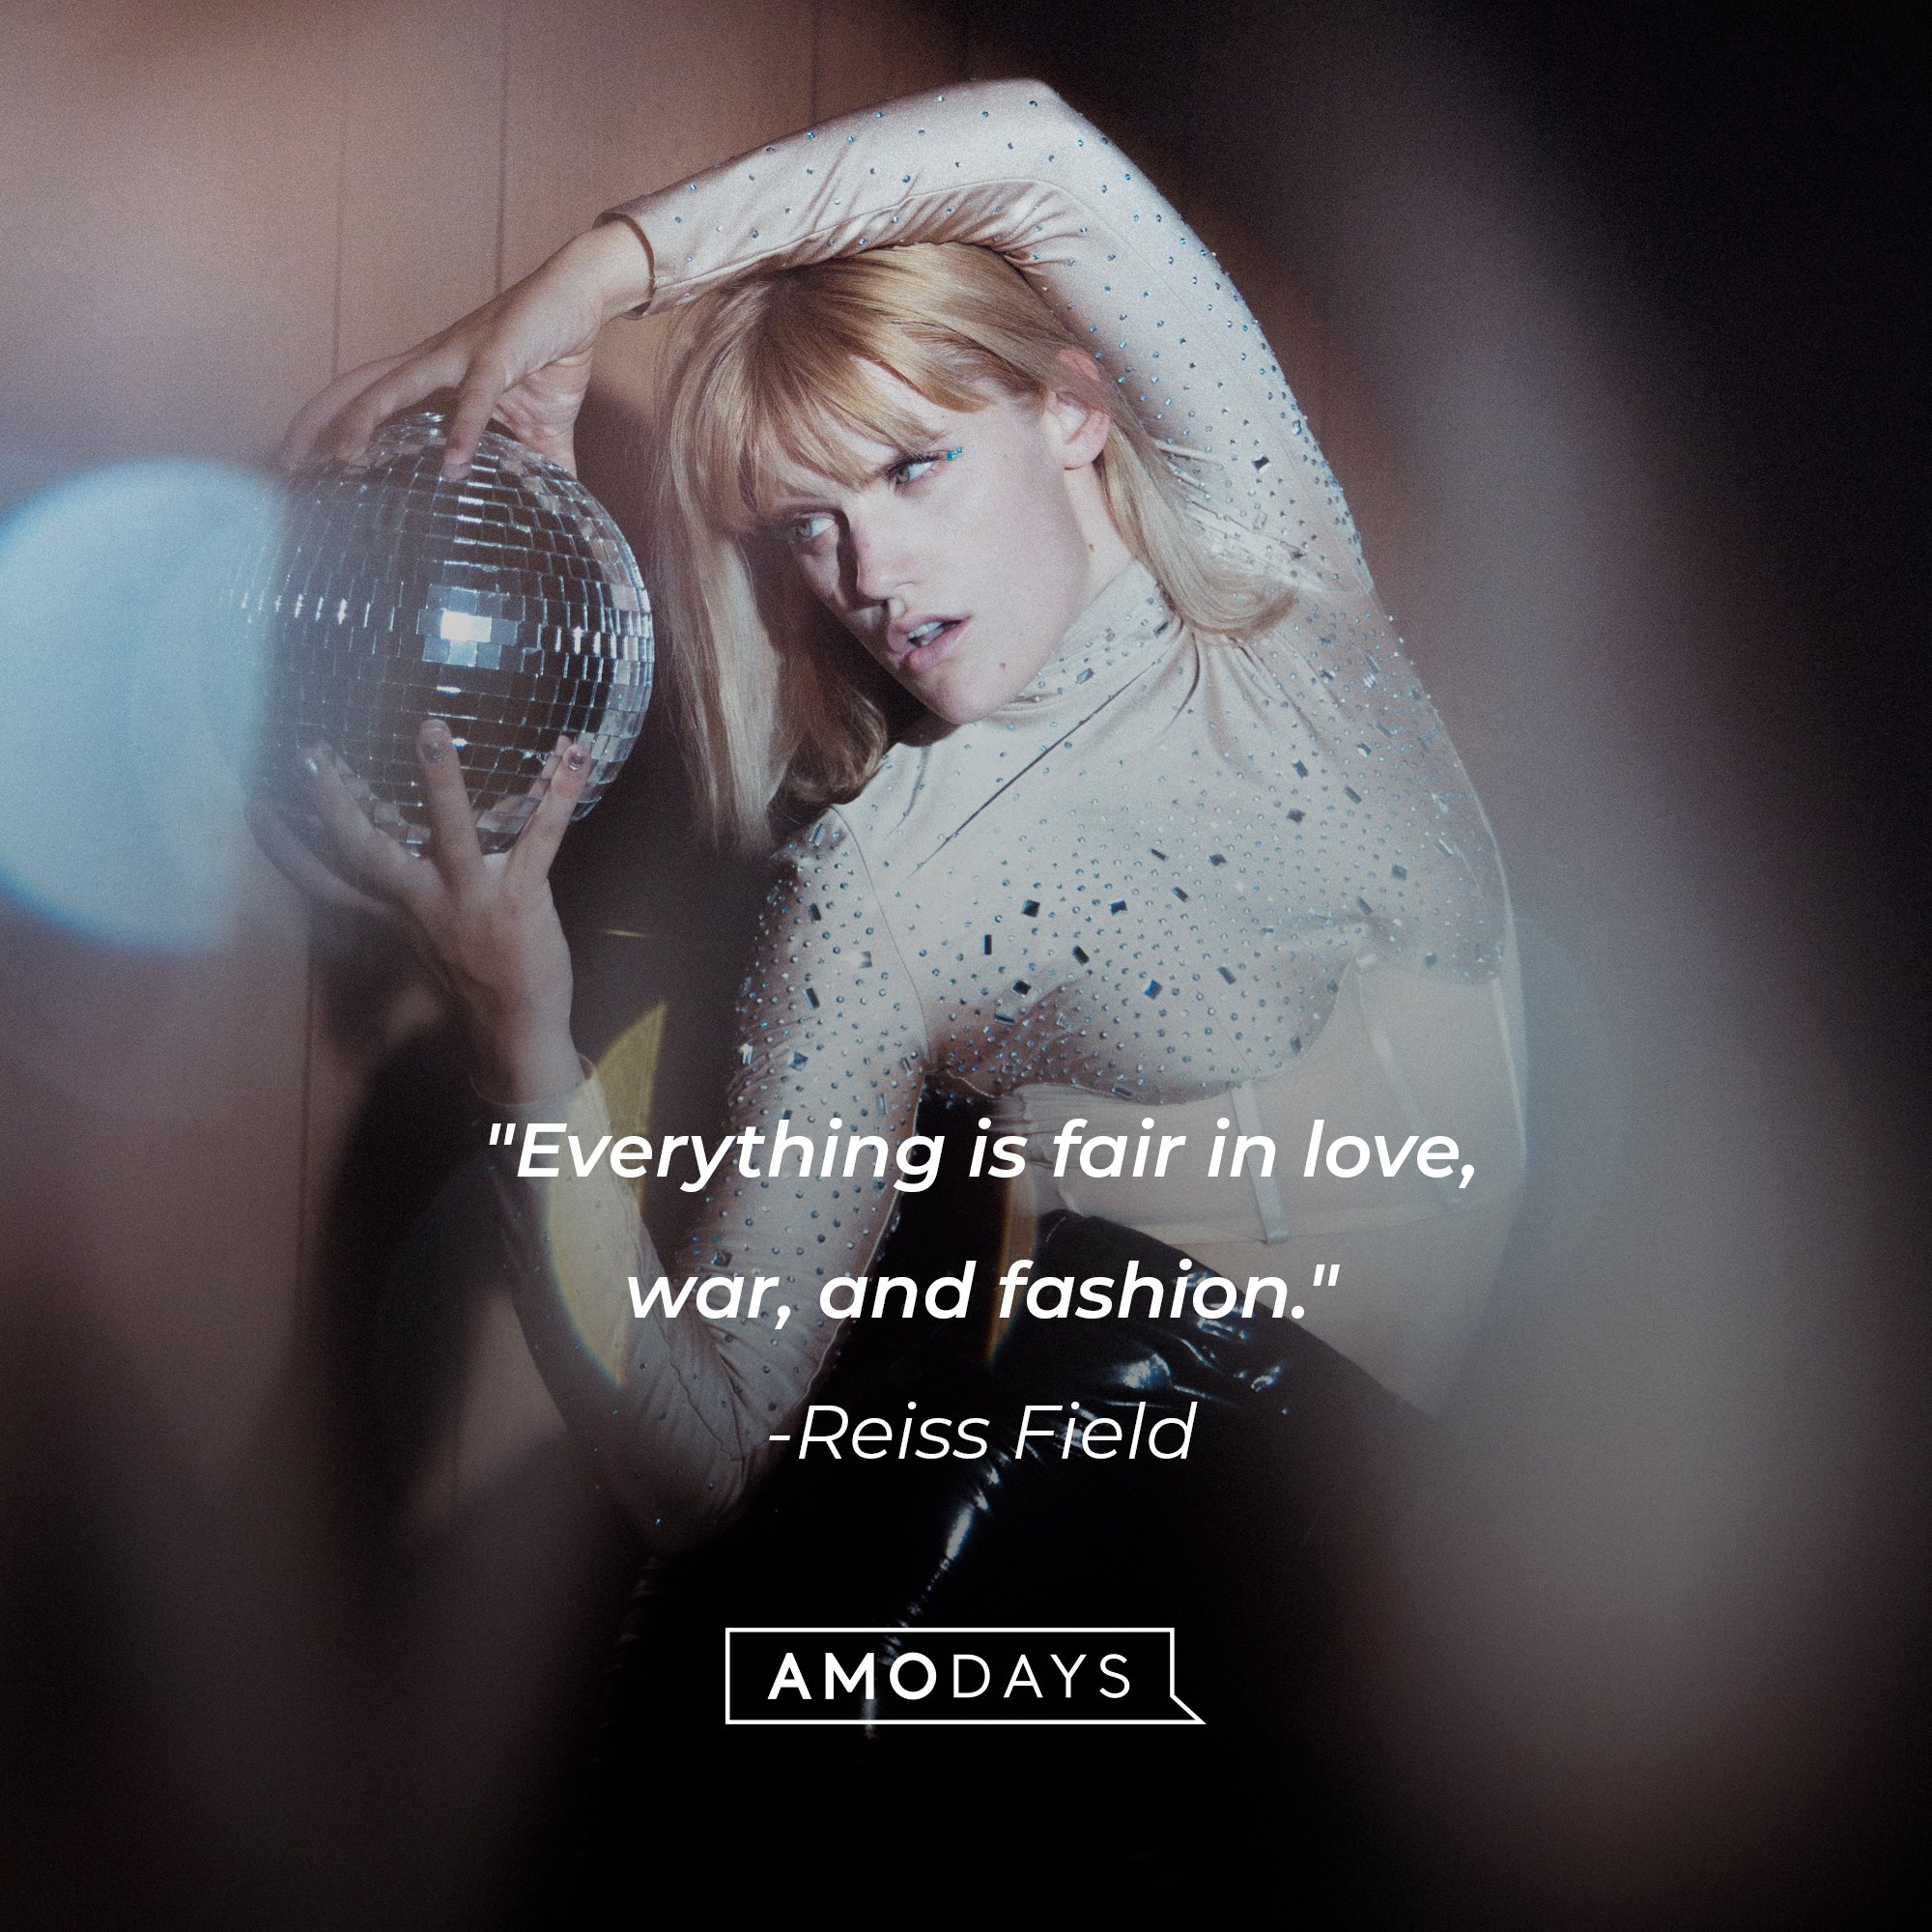 Reiss Field’s quote: "Everything is fair in love, war, and fashion."  | Image: AmoDays